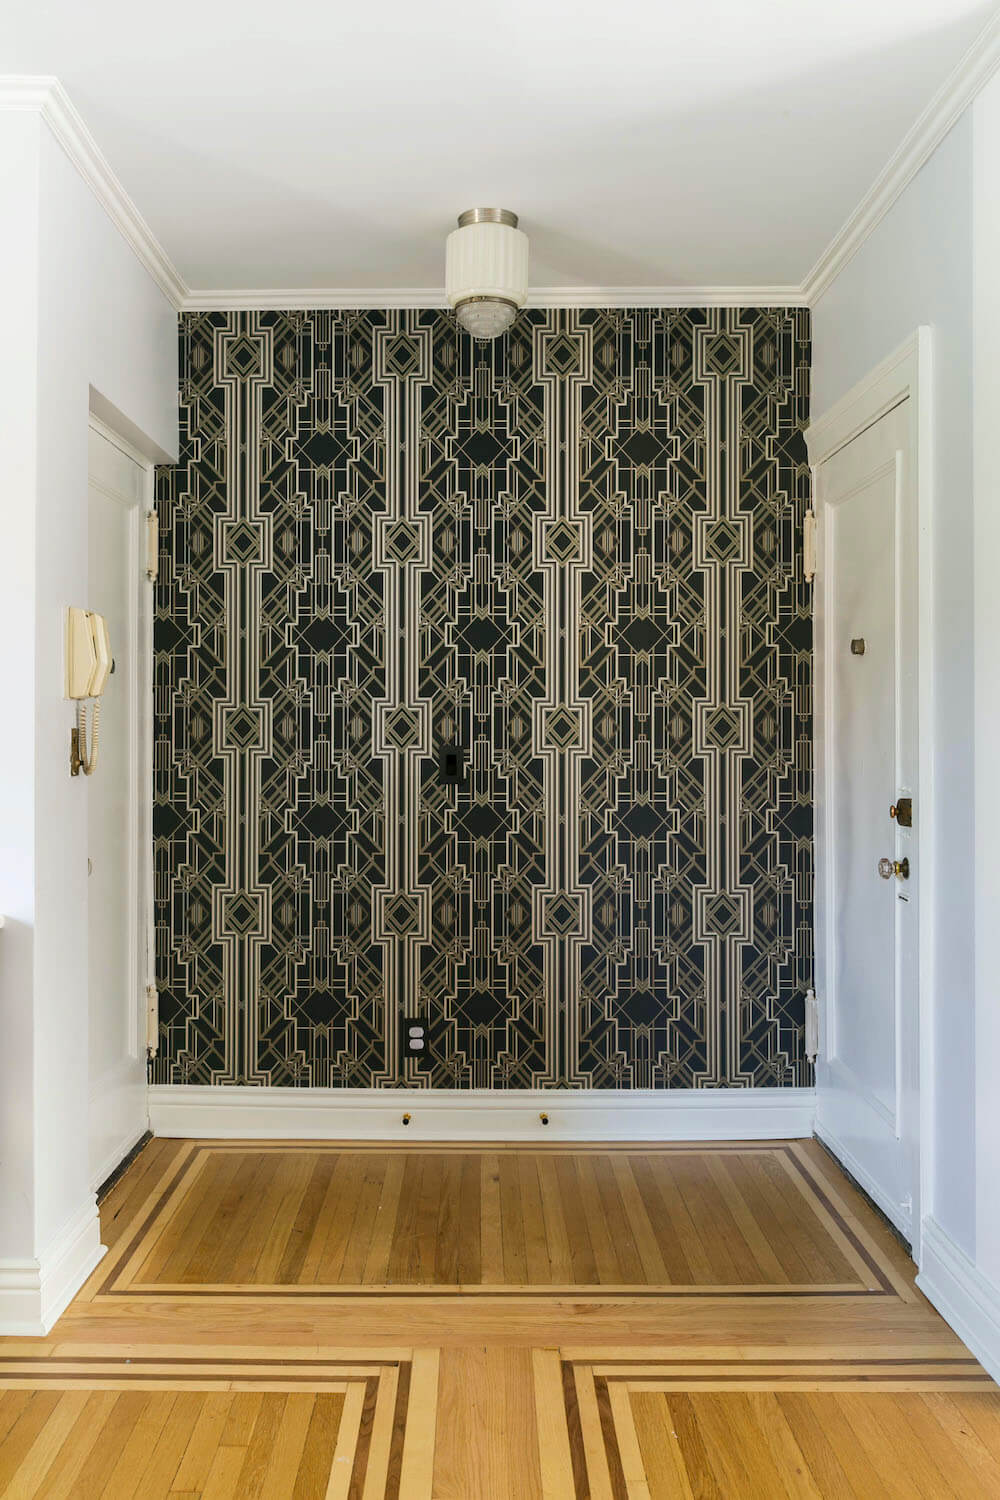 Accent wall at the entryway with graphic wallpaper